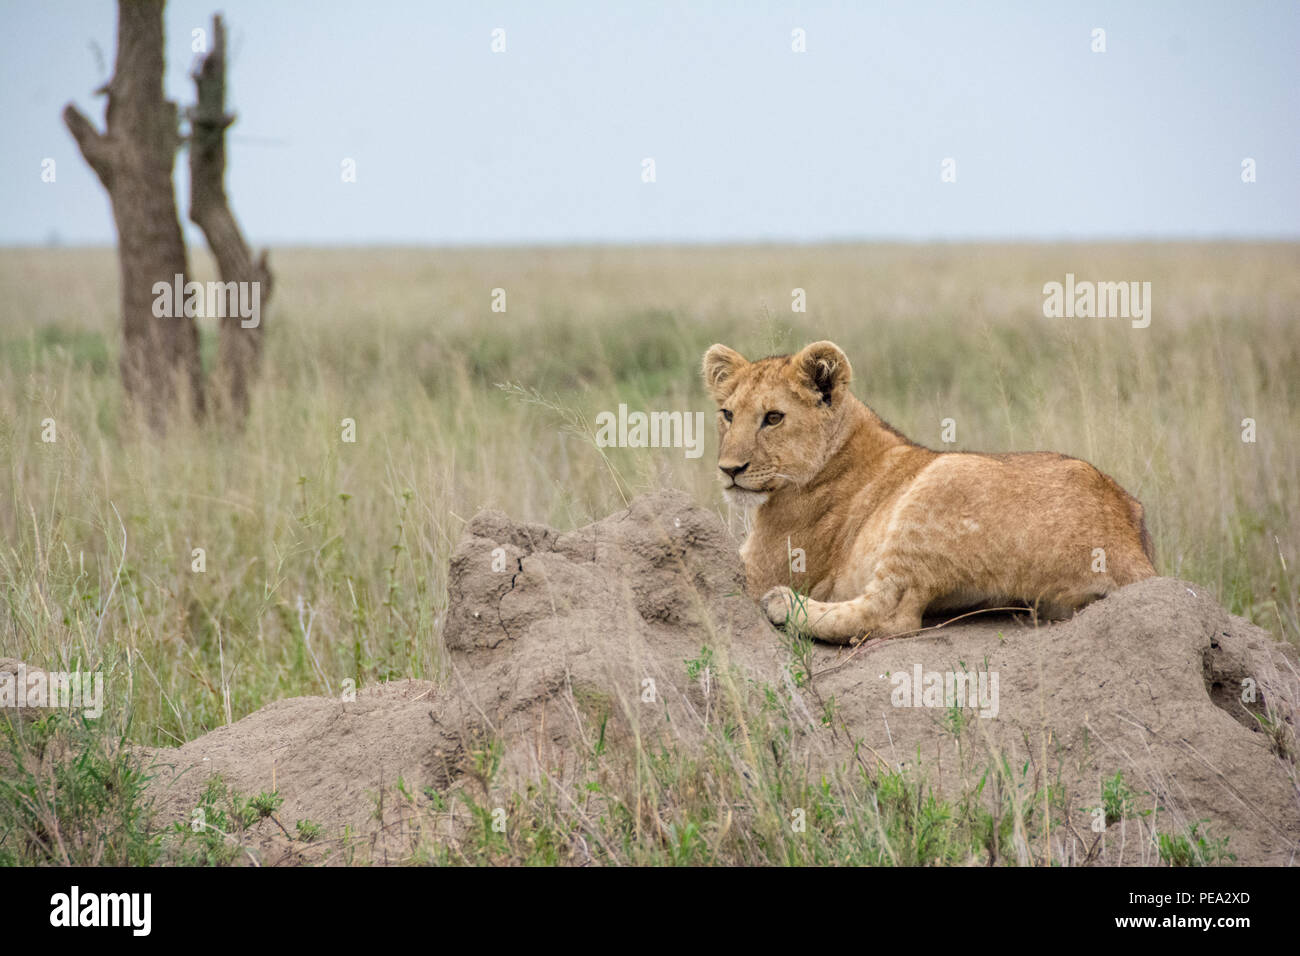 A young cub resting on top of ants mound in Serengeti NP, Tanzania Stock Photo